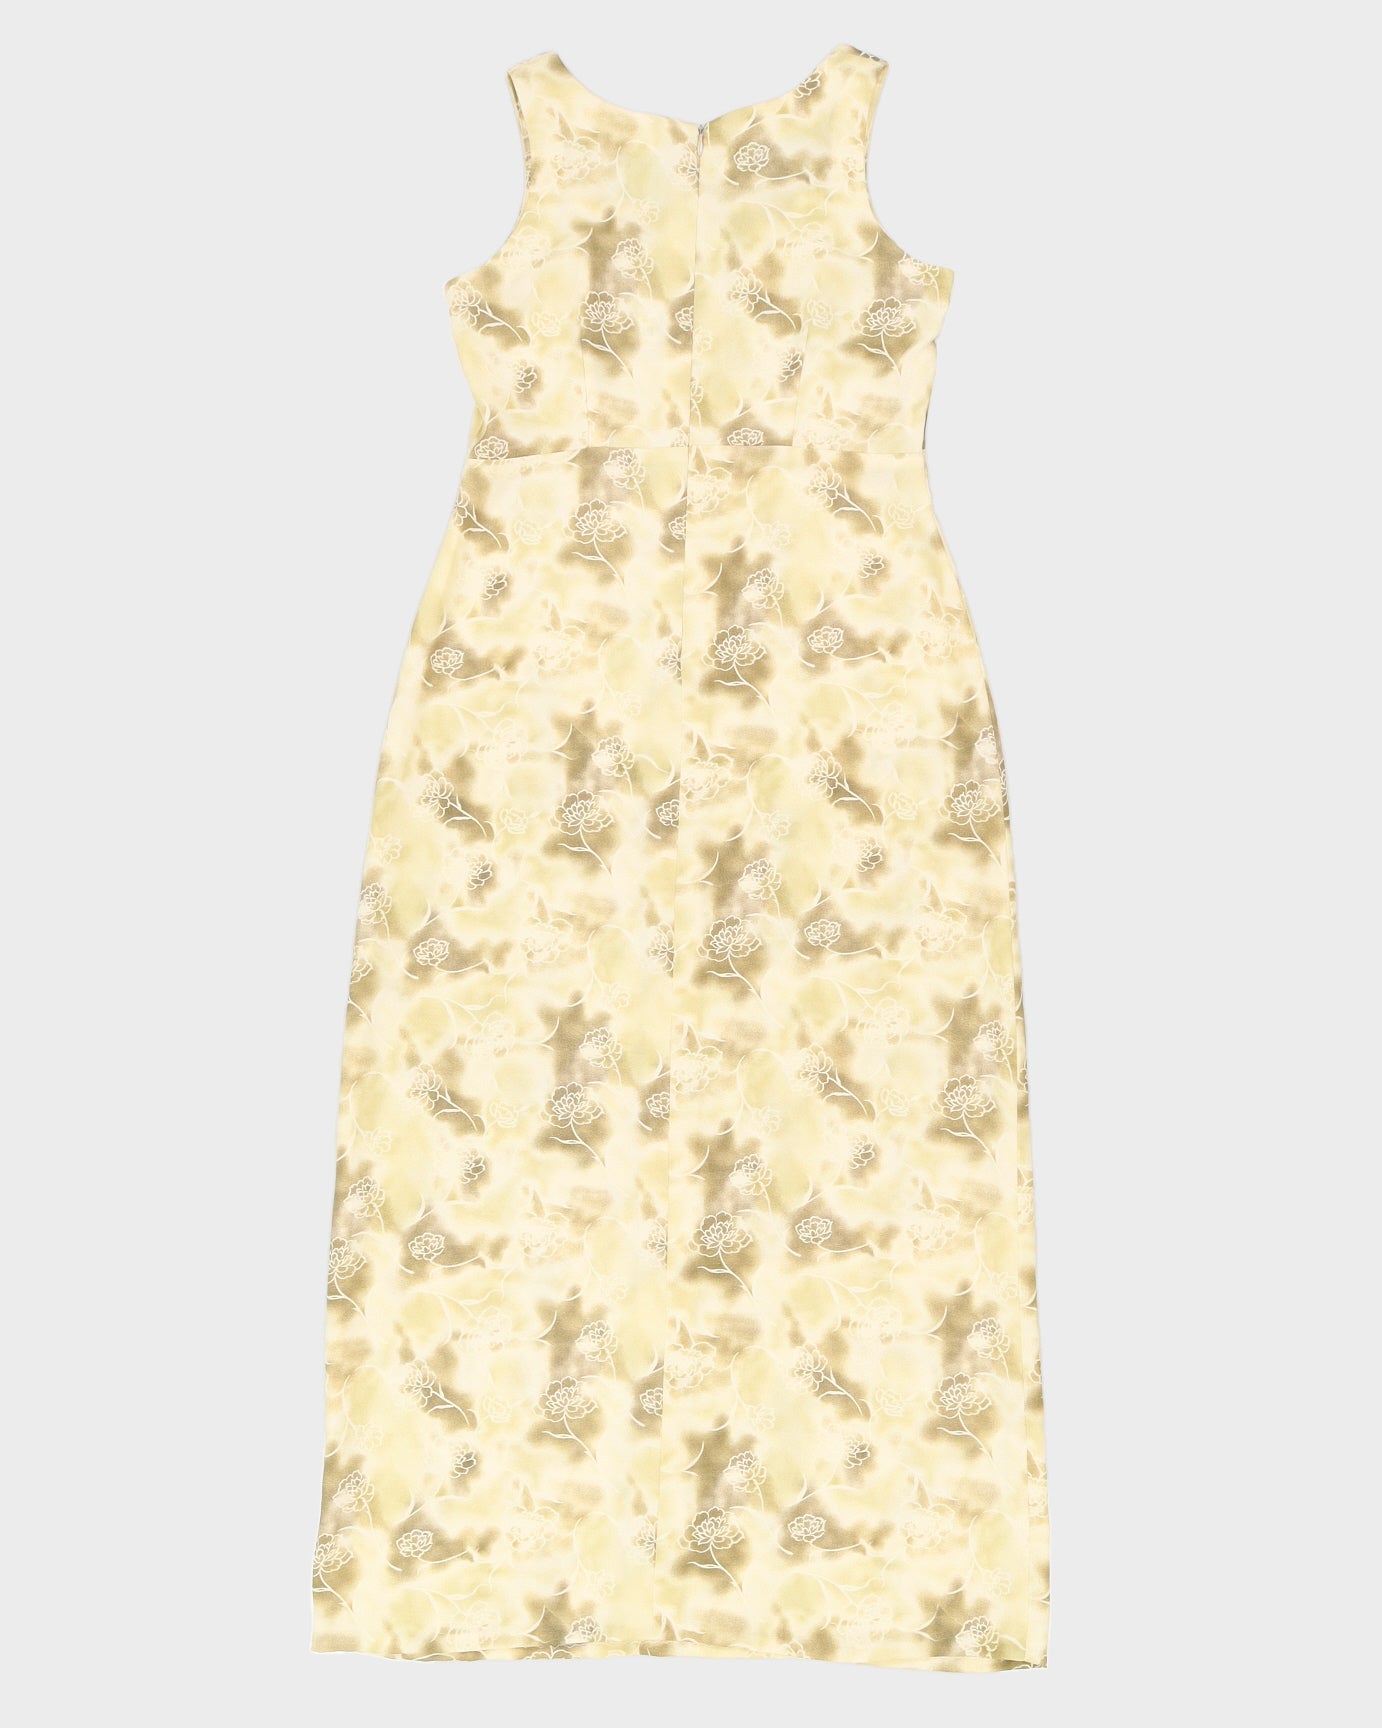 Beige And Yellow Patterned Dress - S